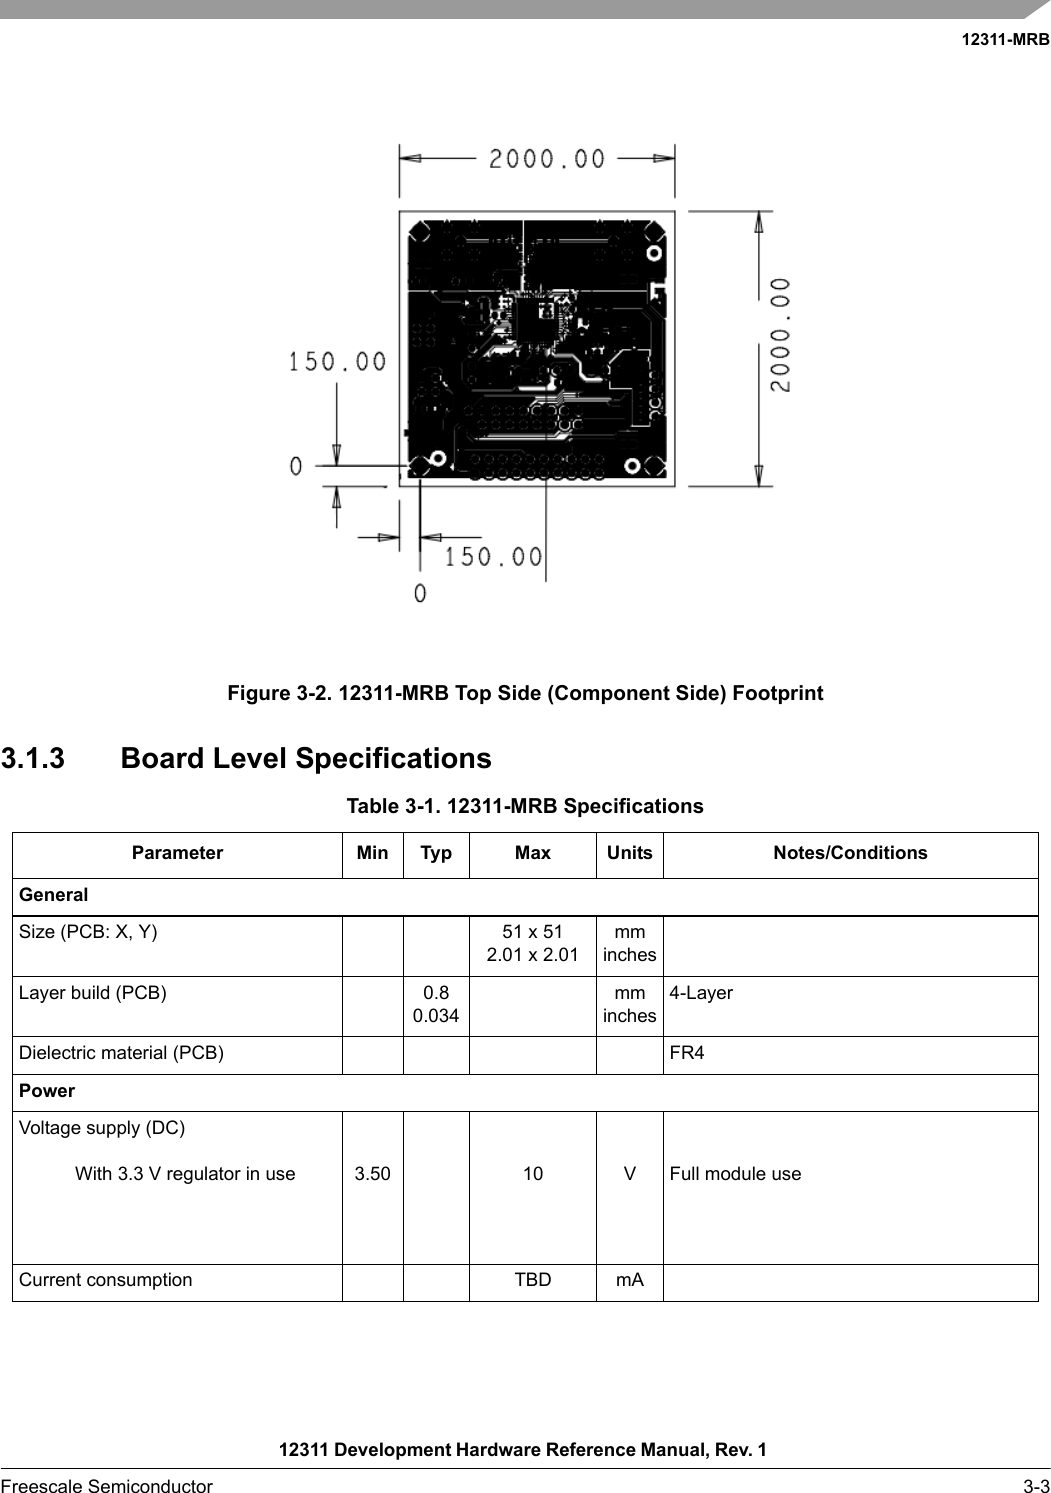 12311-MRB12311 Development Hardware Reference Manual, Rev. 1 Freescale Semiconductor 3-3 Figure 3-2. 12311-MRB Top Side (Component Side) Footprint3.1.3 Board Level SpecificationsTable 3-1. 12311-MRB SpecificationsParameter Min Typ Max Units Notes/ConditionsGeneralSize (PCB: X, Y) 51 x 512.01 x 2.01mminchesLayer build (PCB) 0.80.034mminches4-LayerDielectric material (PCB) FR4PowerVoltage supply (DC)With 3.3 V regulator in use 3.50 10 V Full module useCurrent consumption TBD mA